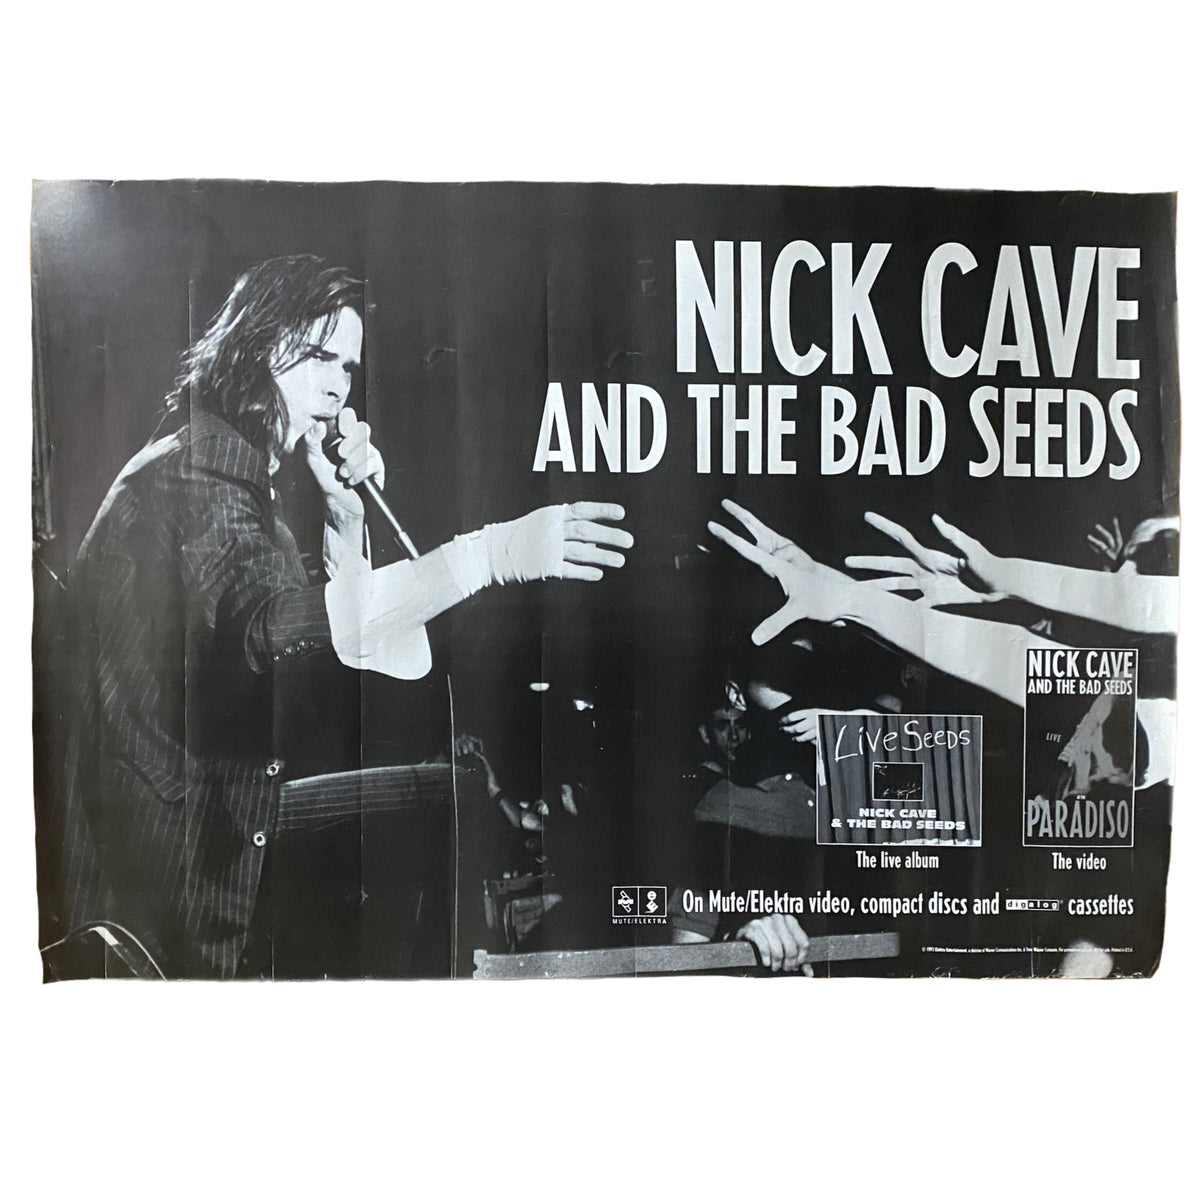 Vintage Nick Cave And The Bad Seeds &quot;Live Seeds/Paradiso&quot; Mute/Elektra Records Poster